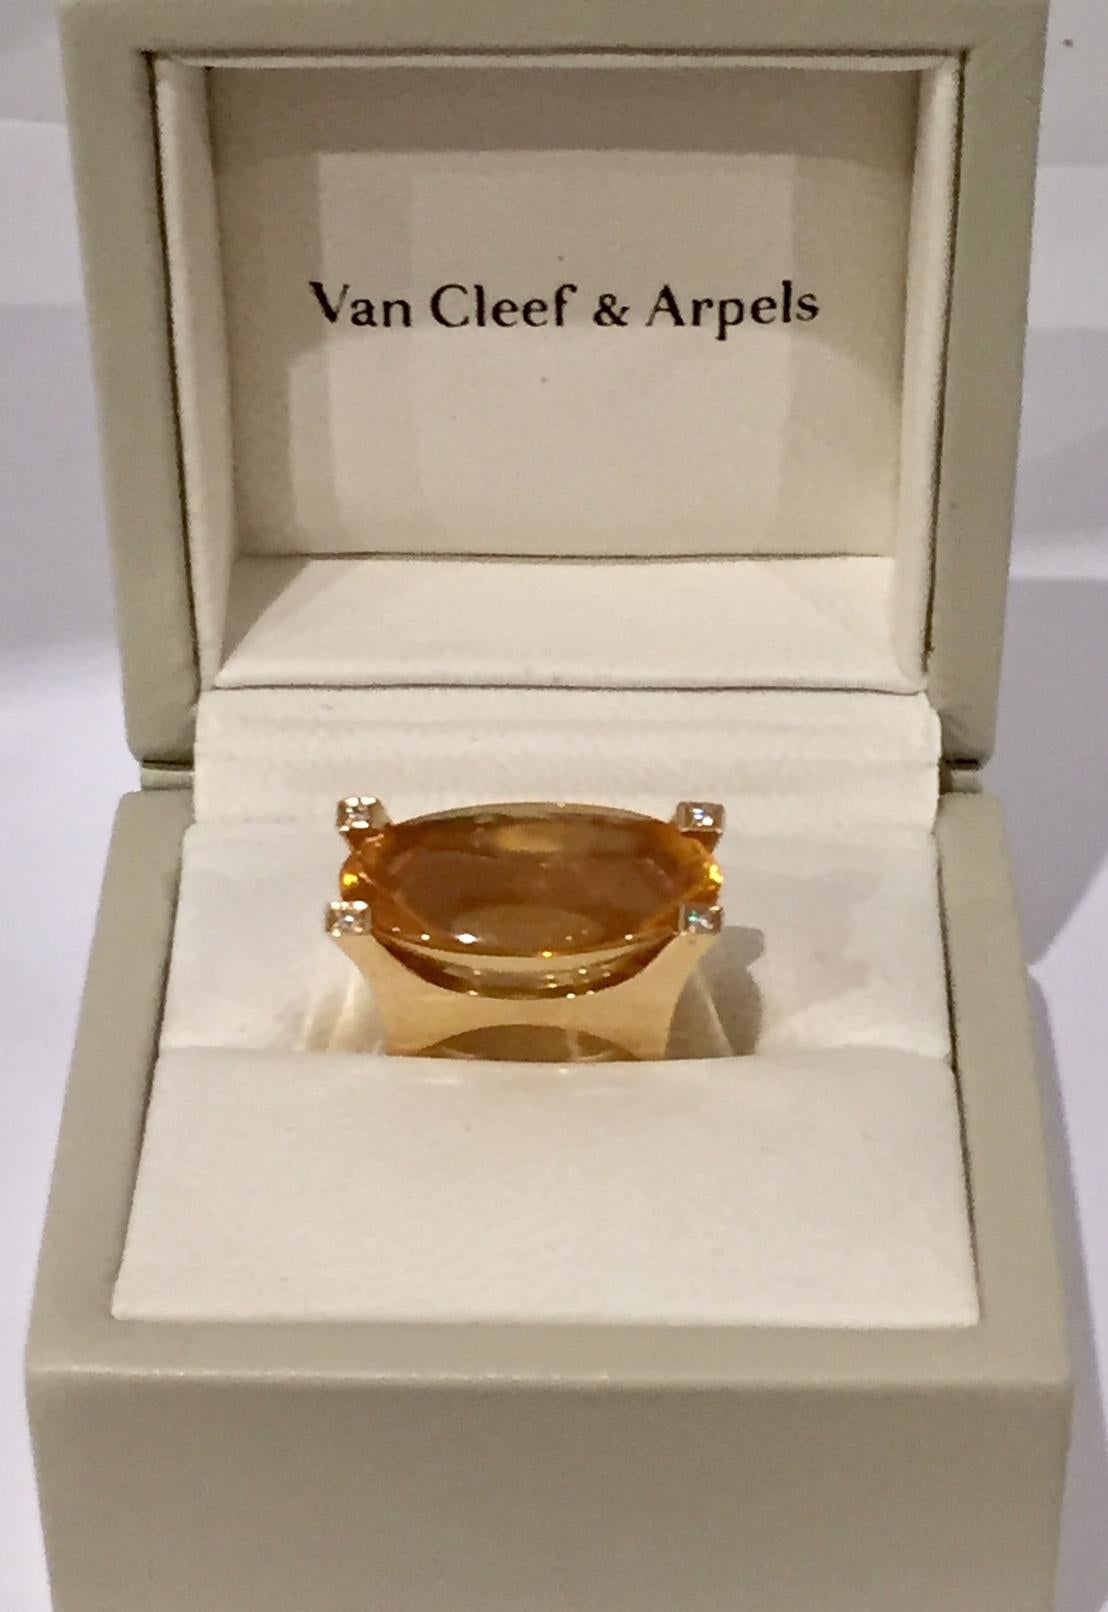 Classic VCA, this is a beautiful Citrine & Diamond retro cocktail ring.  Set elegantly in a modern heavy gold setting. Extremely well made and in beautiful condition. Fully signed and numbered. The bold shape features a monumental honey yellow 